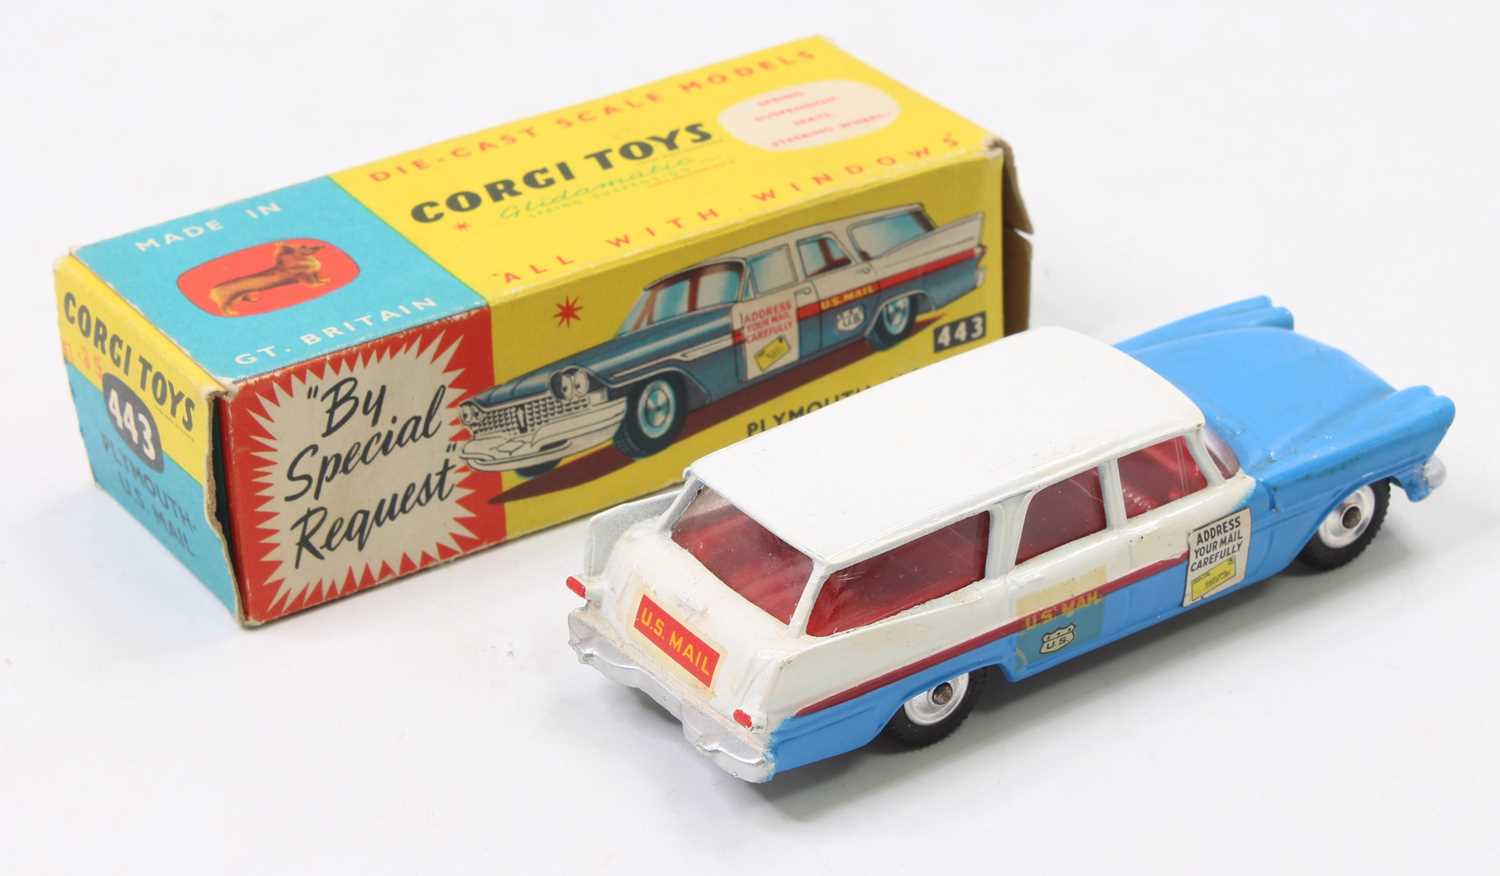 Corgi Toys No. 443 Plymouth US Mail car, white with mid-blue bonnet and red side flash, red interior - Image 2 of 2